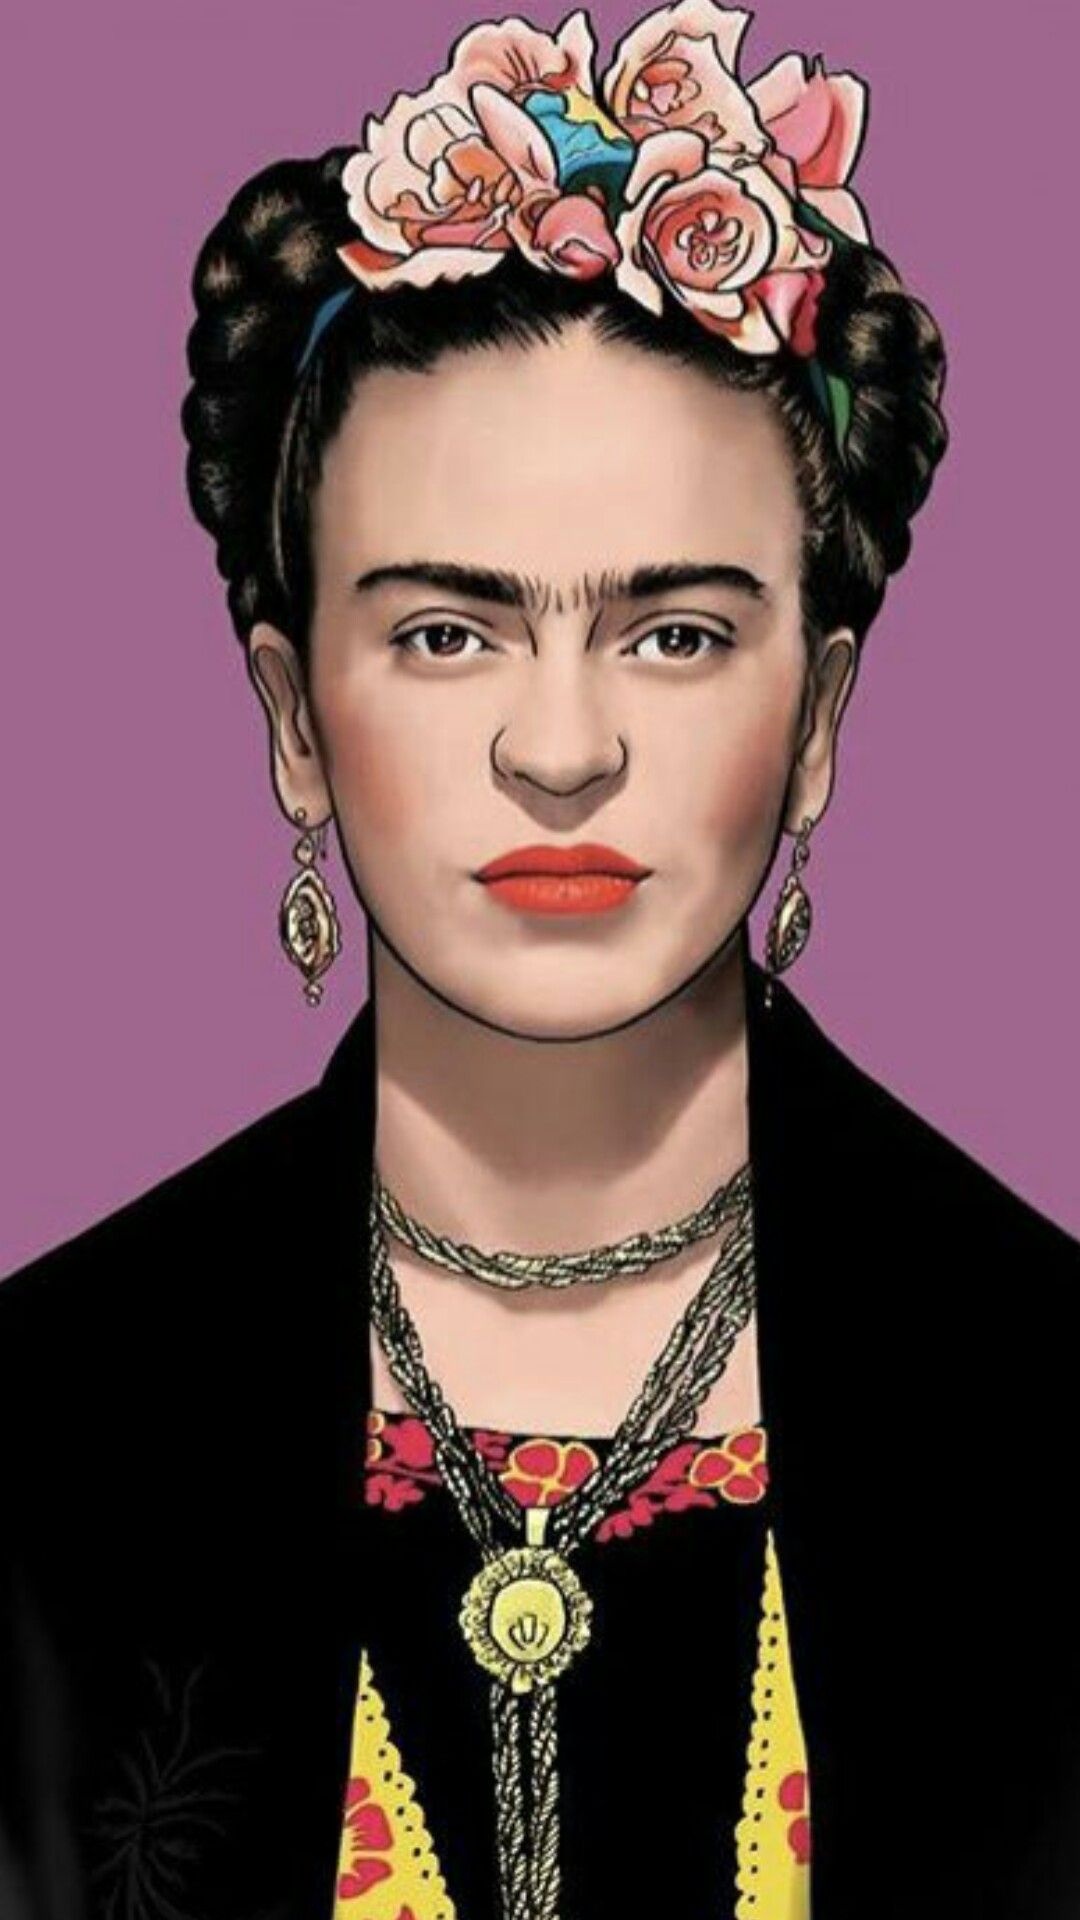 Frida (Movie) Wallpapers (8+ images inside)